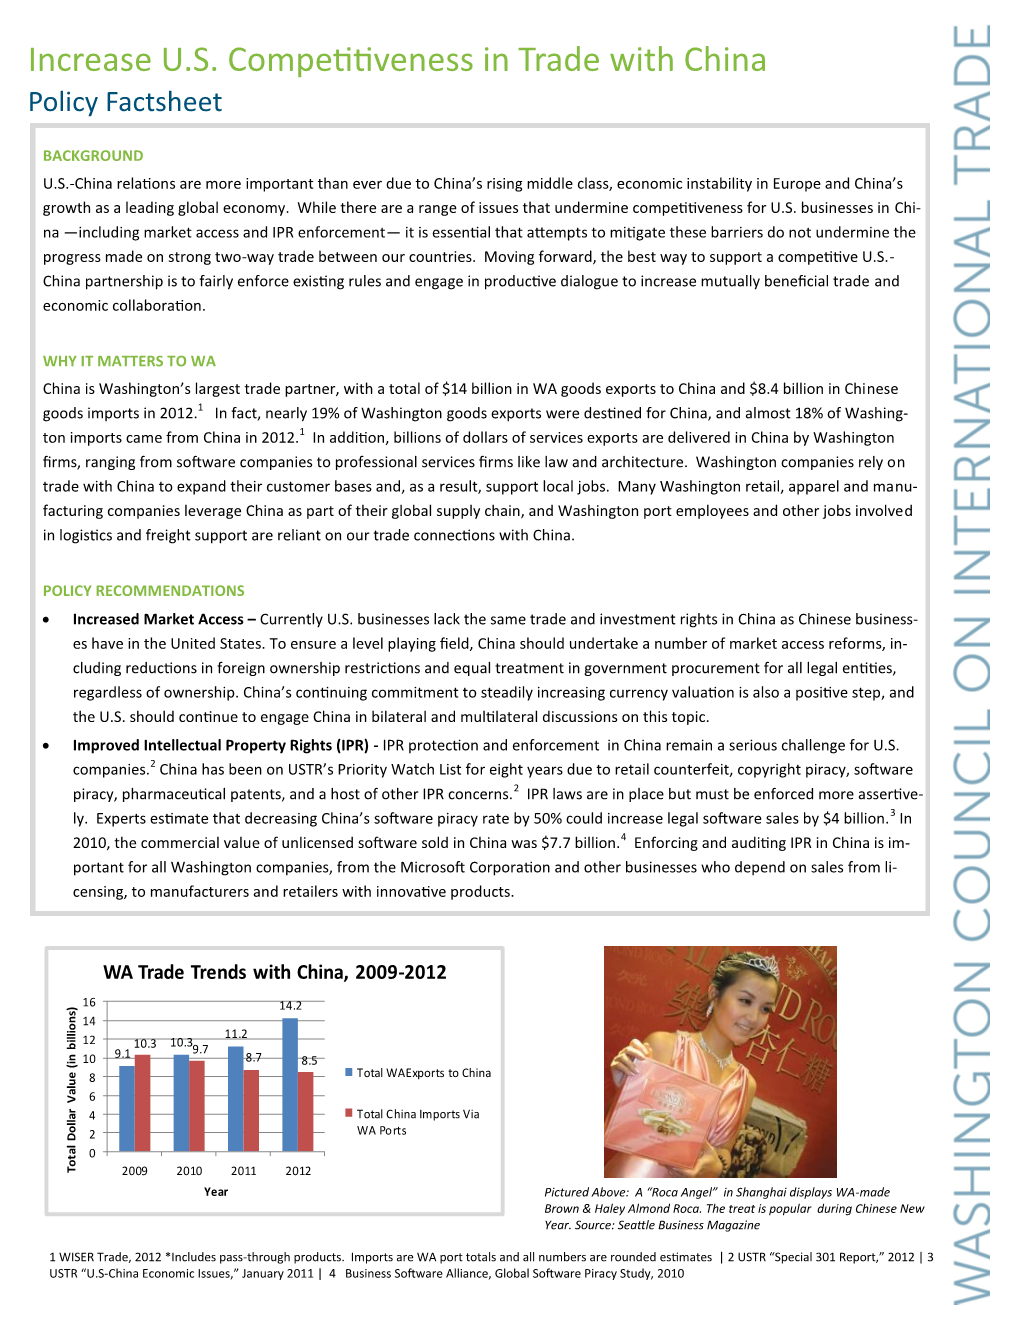 Increase U.S. Competitiveness in Trade with China Policy Factsheet